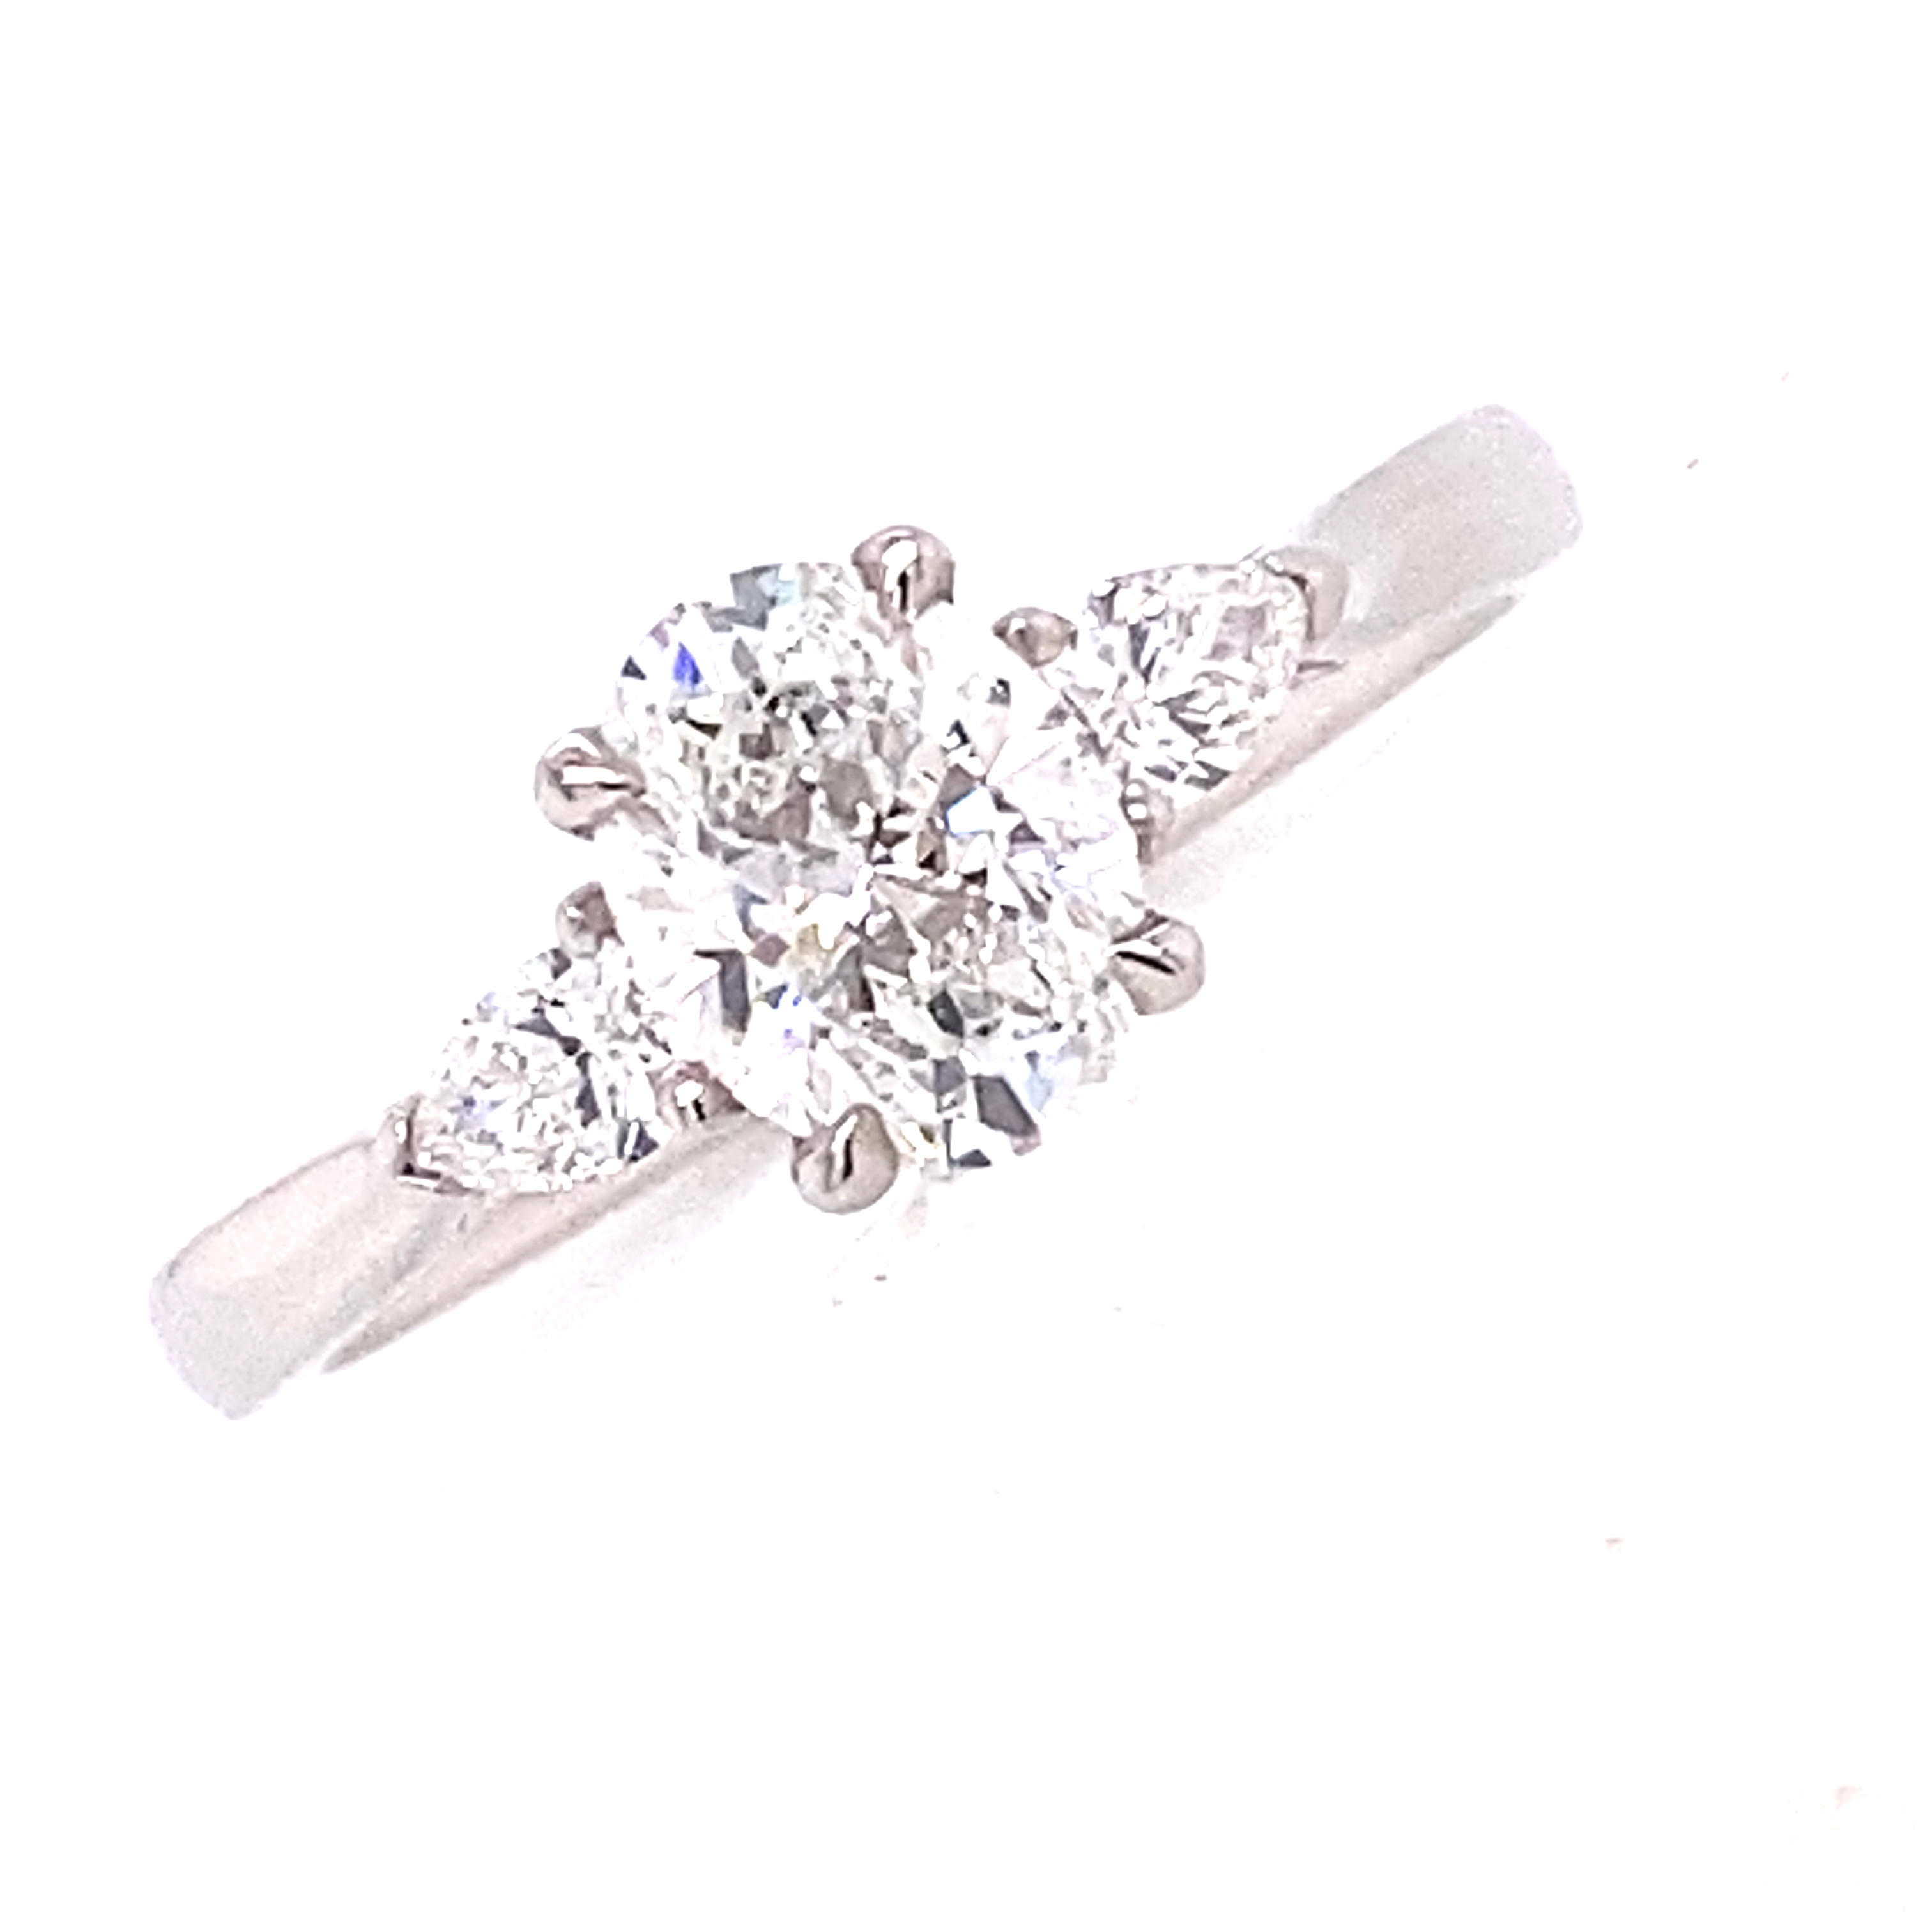 A Platinum and Diamond Ring with Ovals and Pear Shapes.